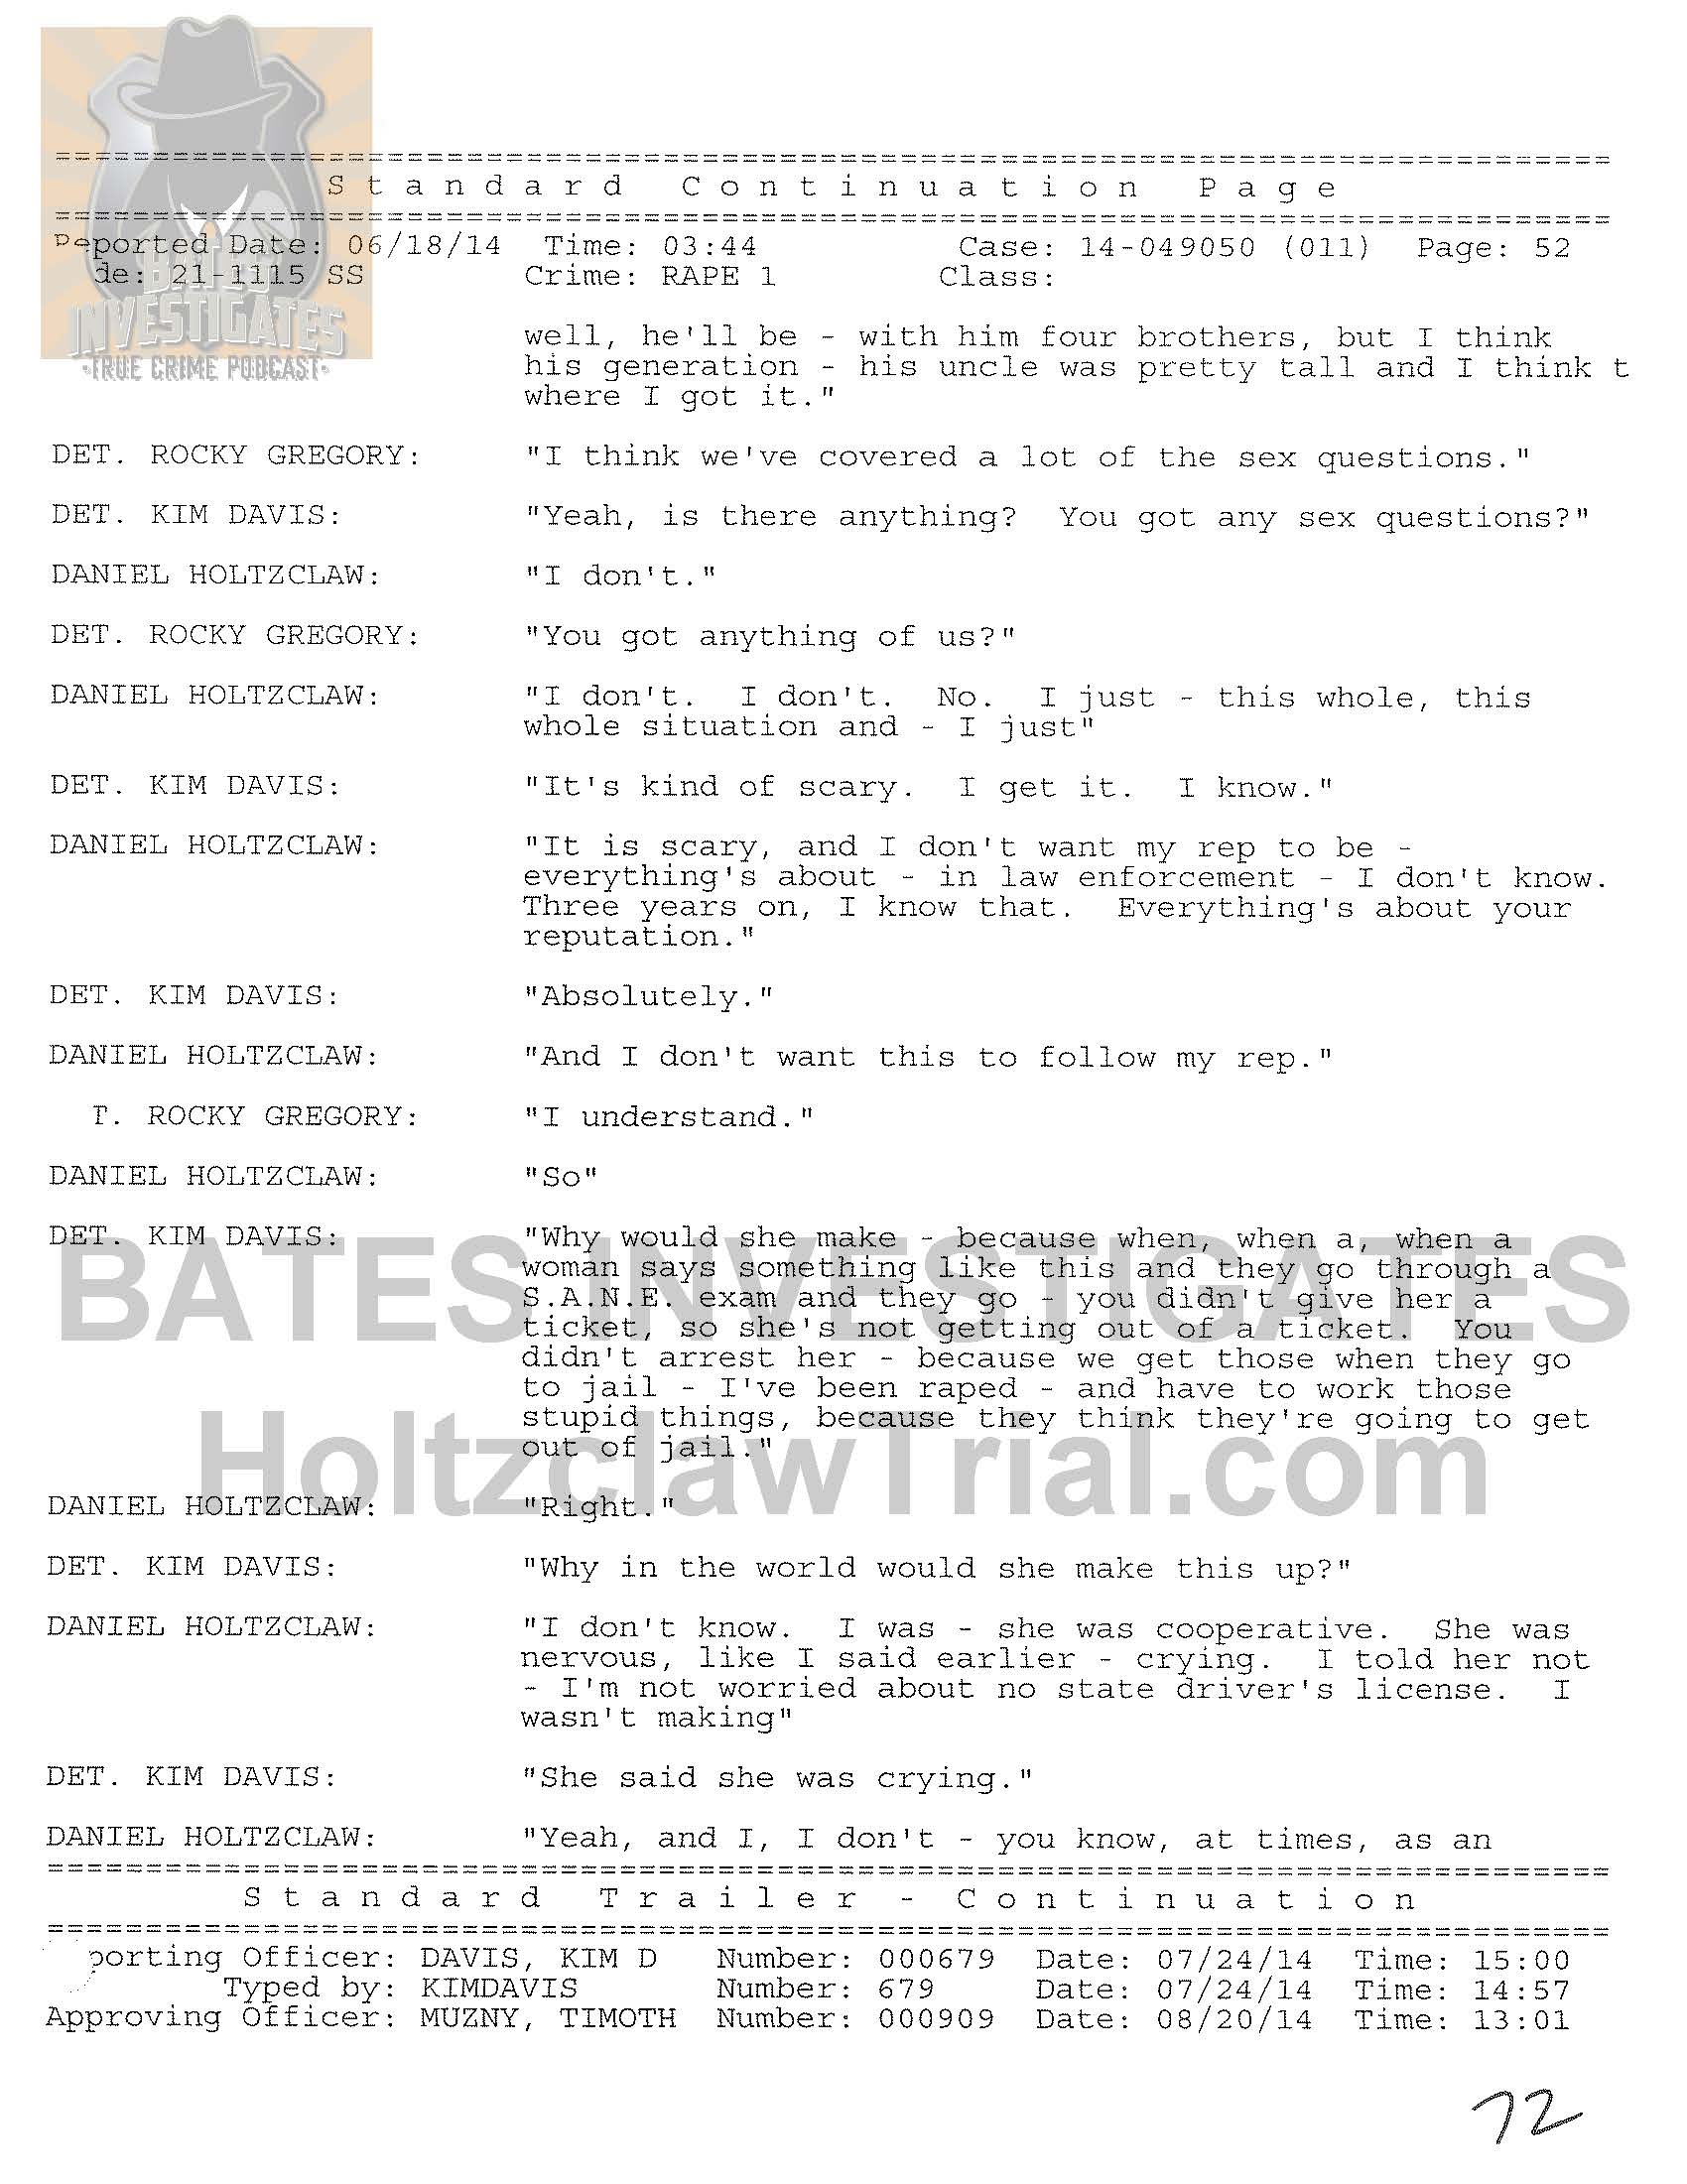 Holtzclaw Interrogation Transcript - Ep02 Redacted_Page_52.jpg